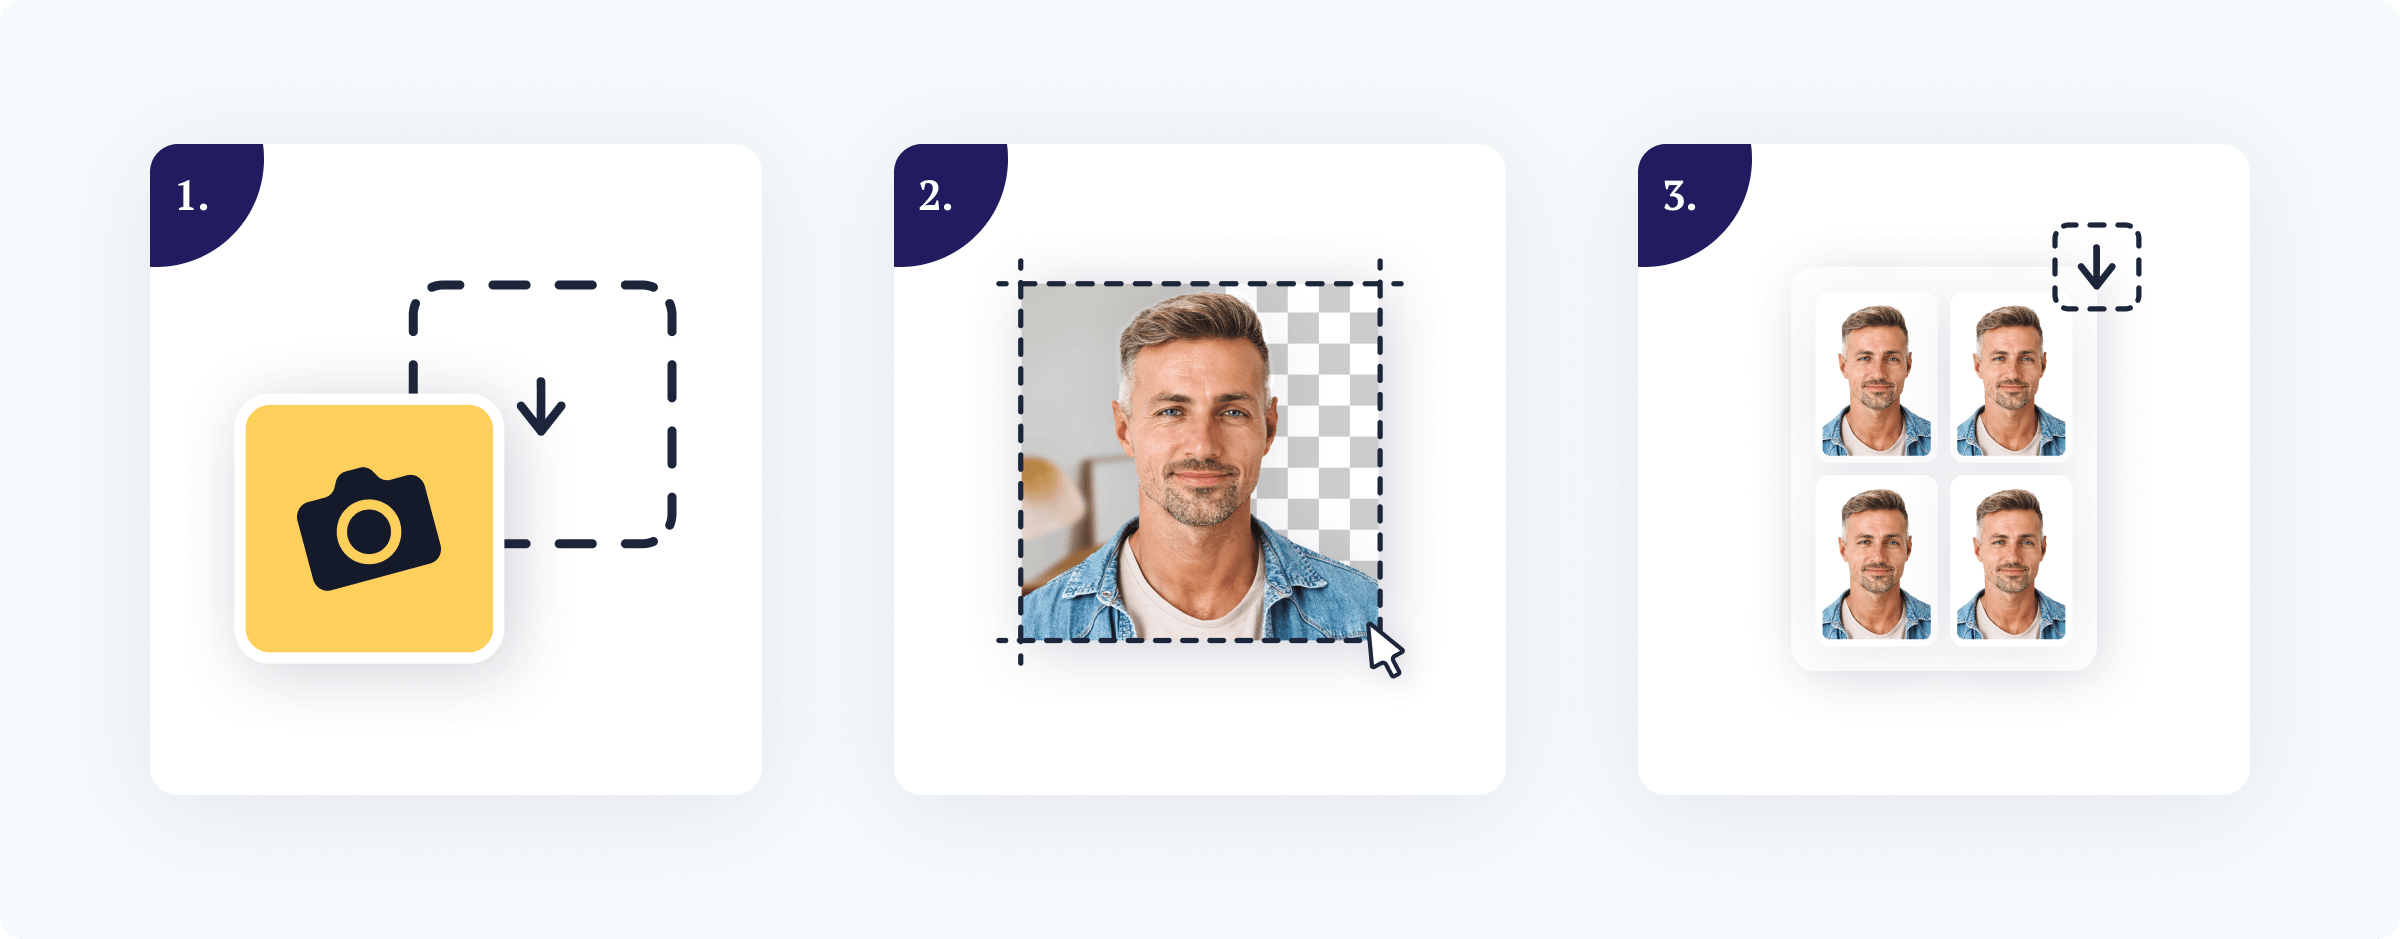 Passport Photo Online’s 3-step process explained in 3 images.